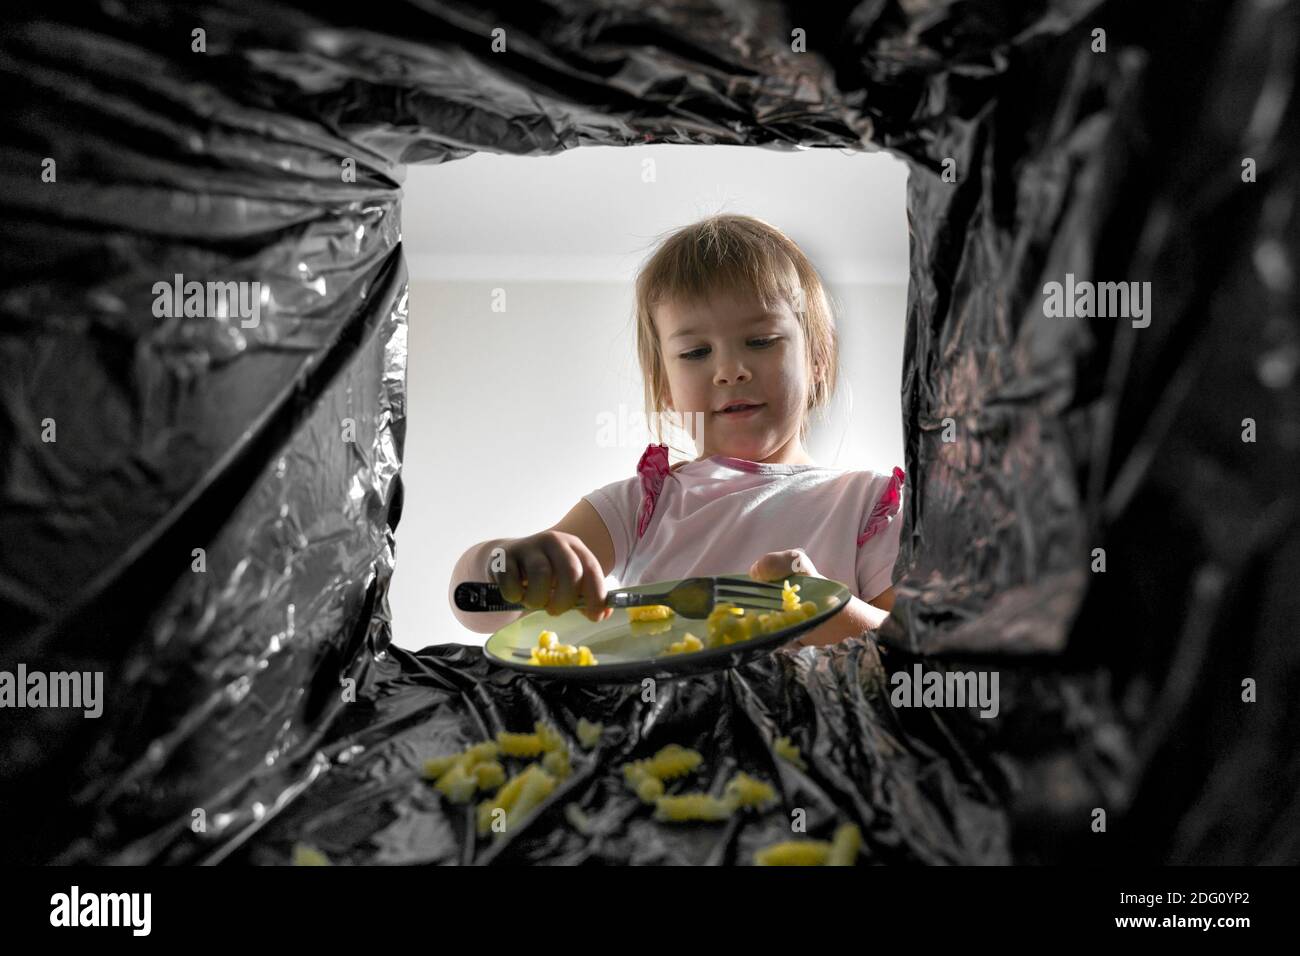 child throws pasta into the trash bin. view from the trash can. excessive consumption Stock Photo